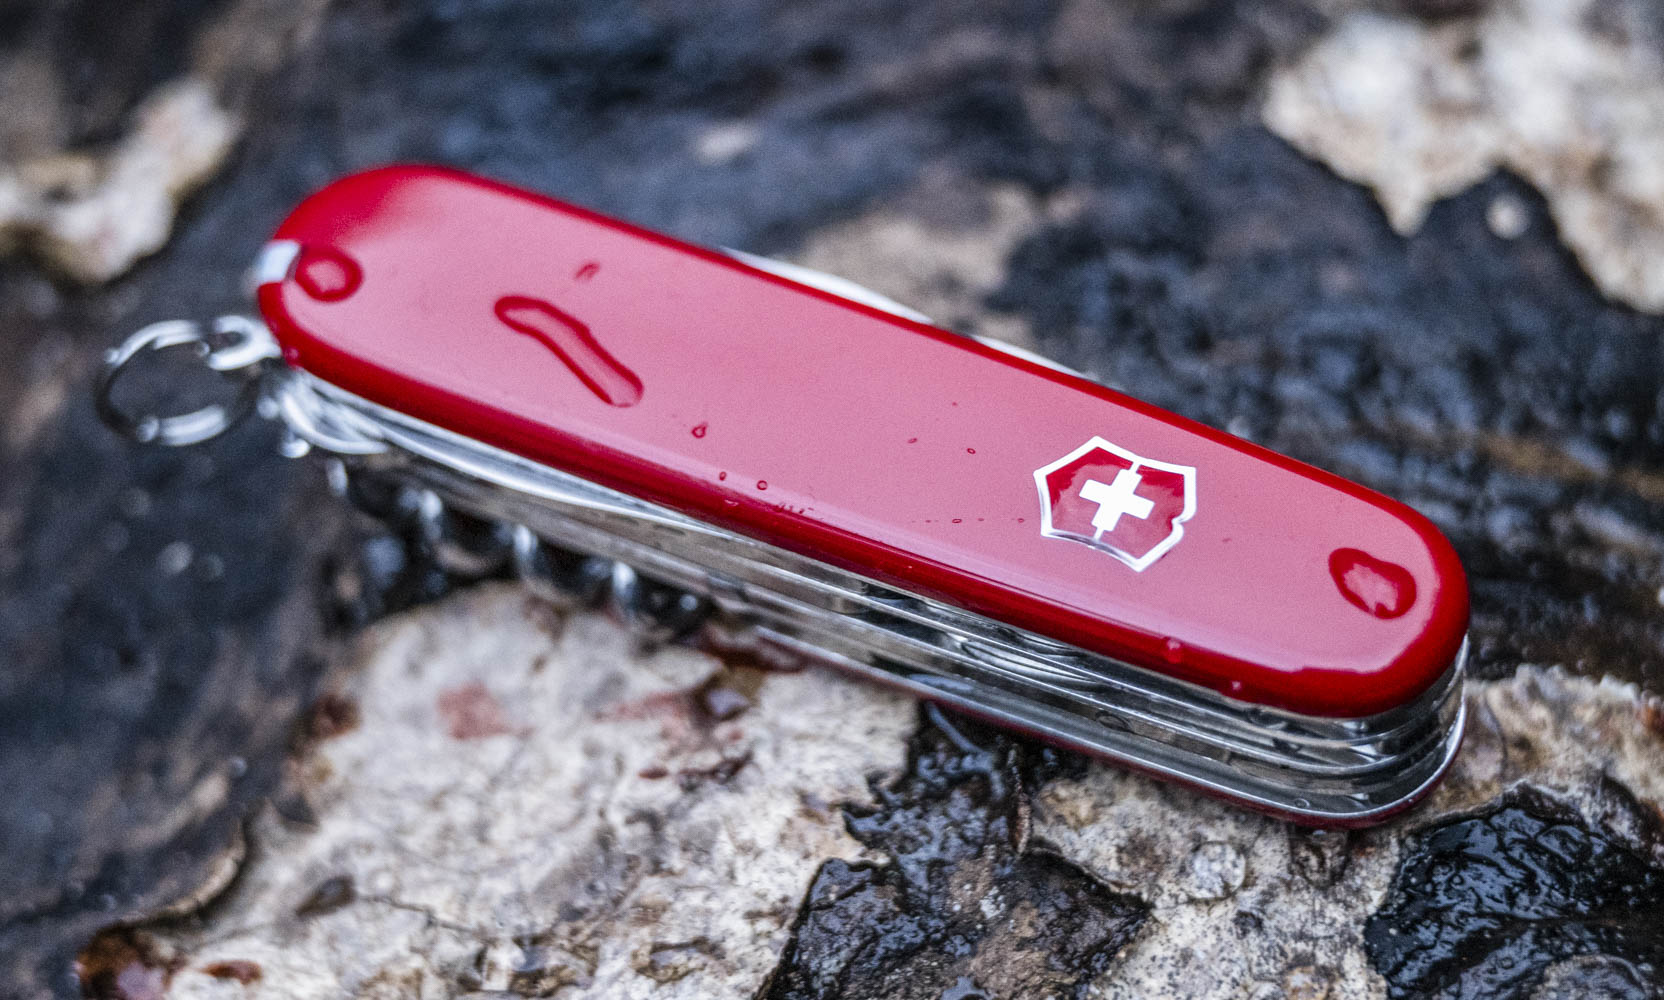 A Great Victorinox Everyday carry